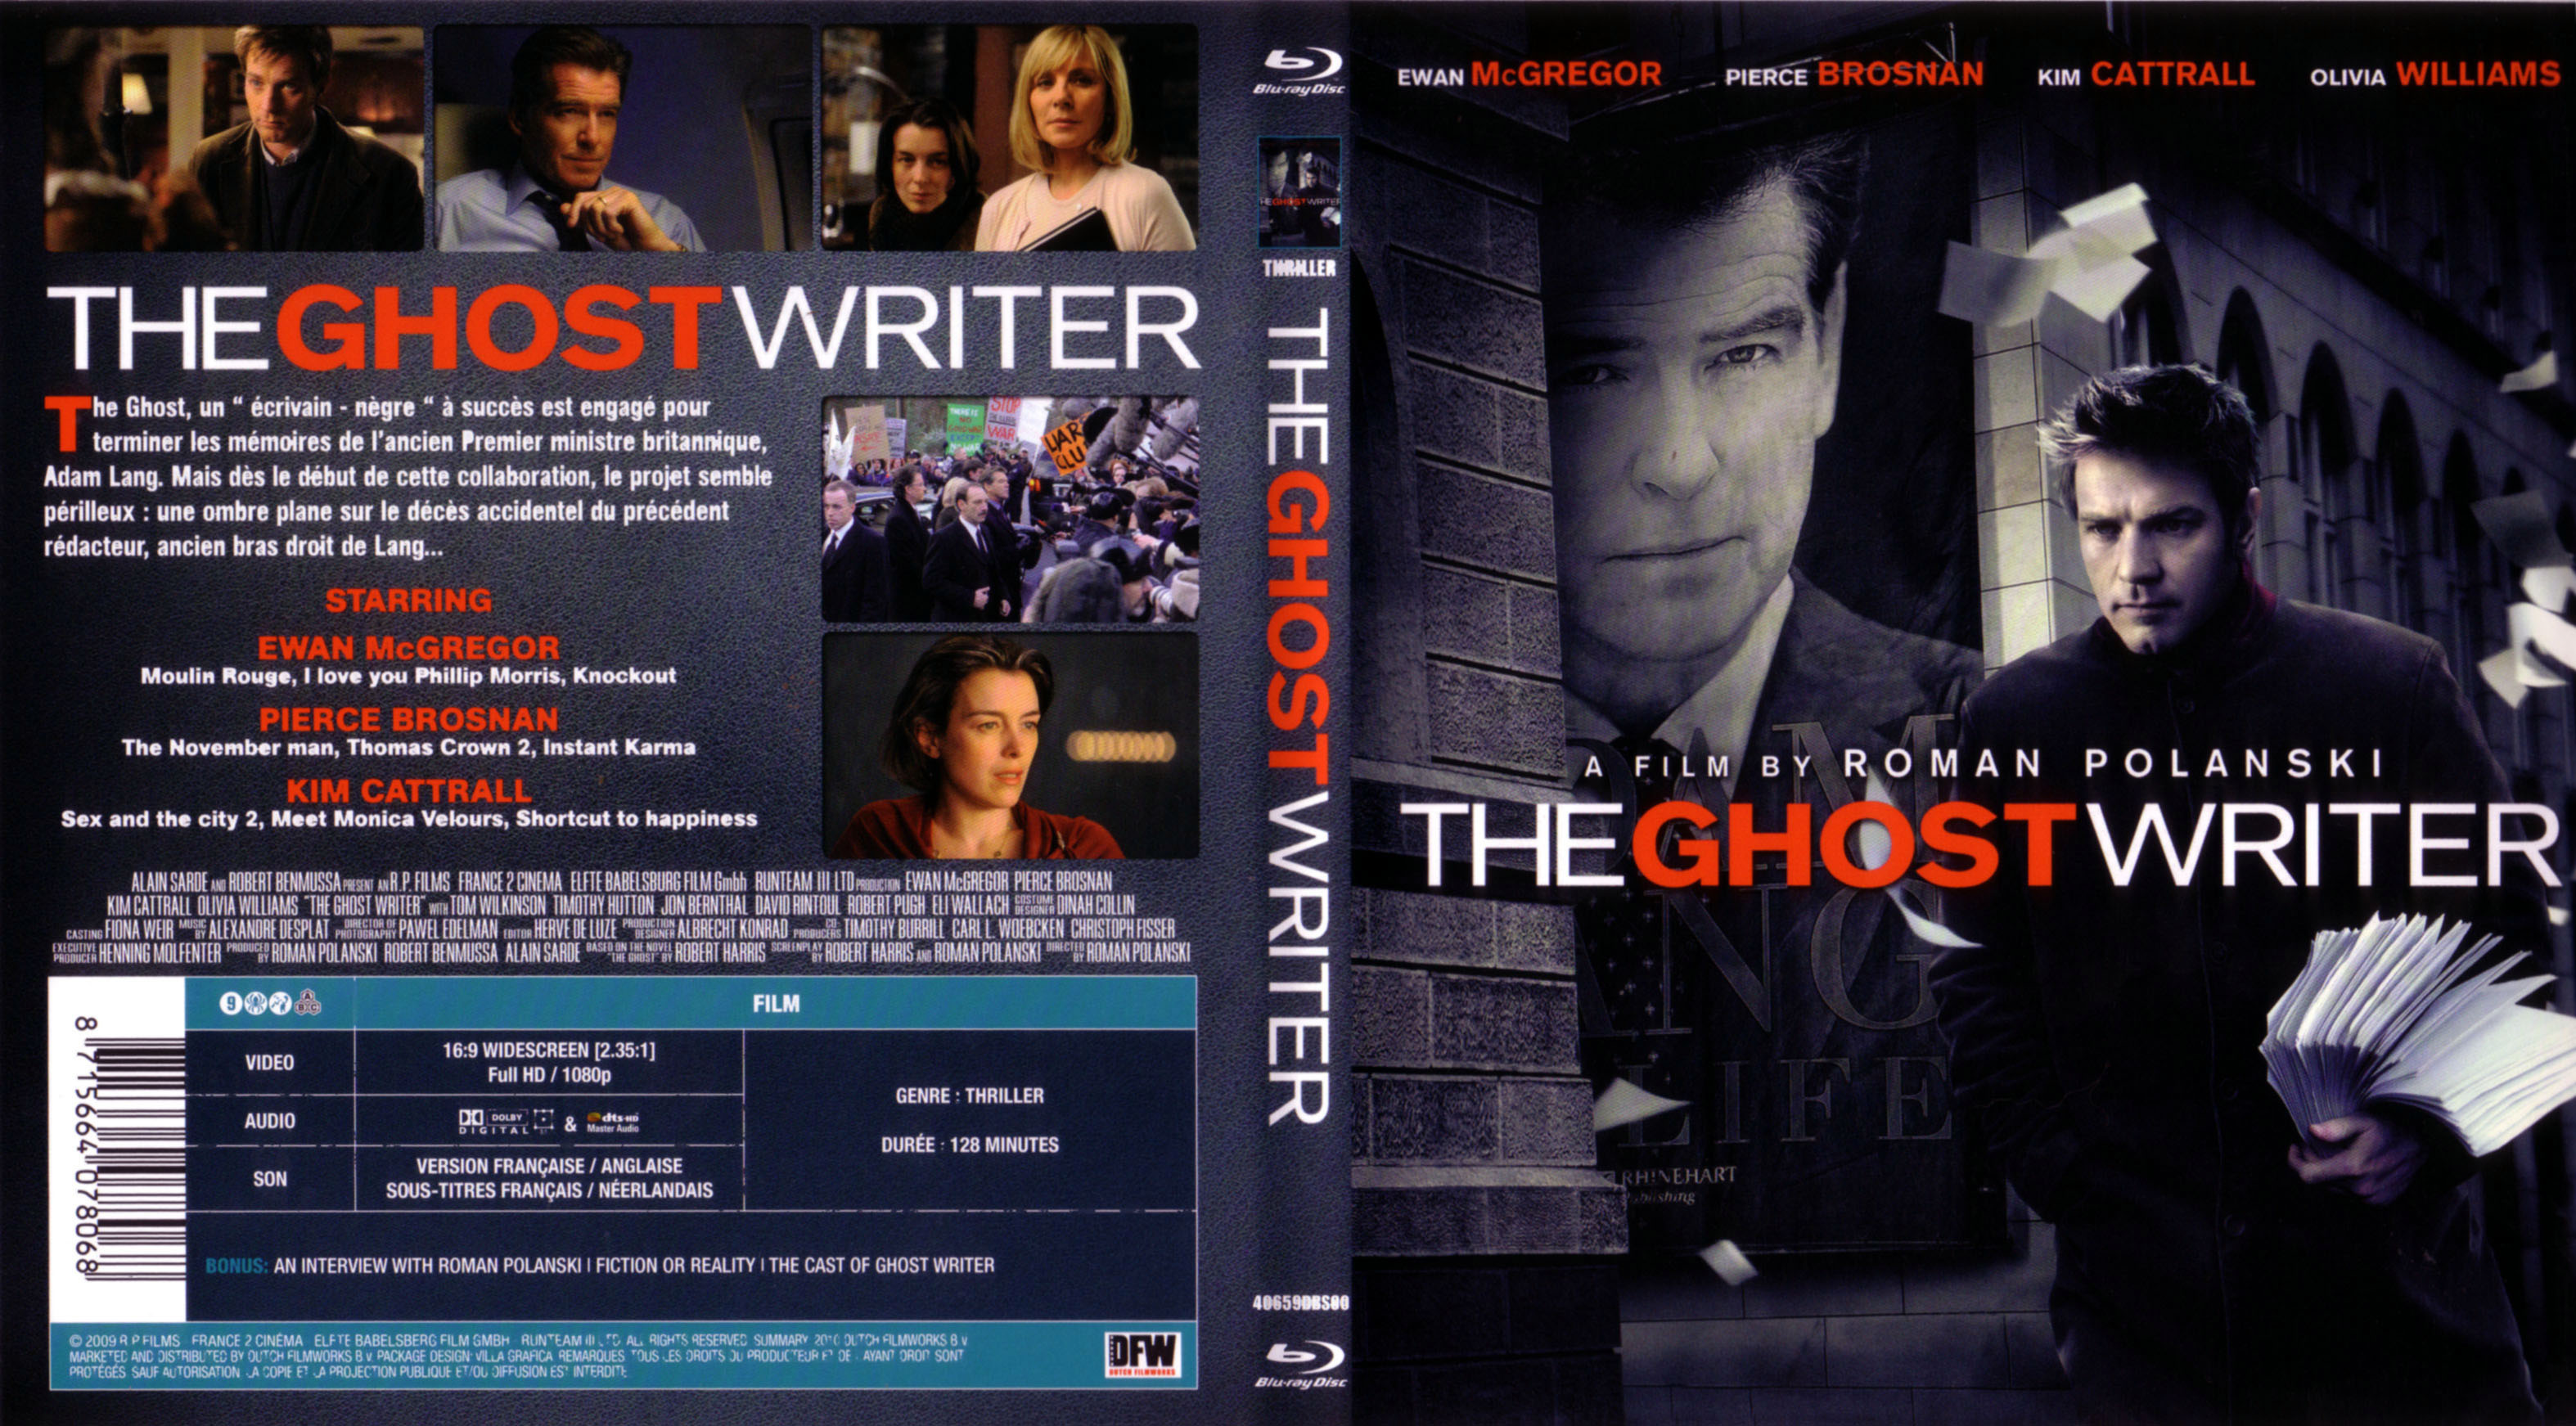 Jaquette DVD The ghost writer (BLU-RAY) v2